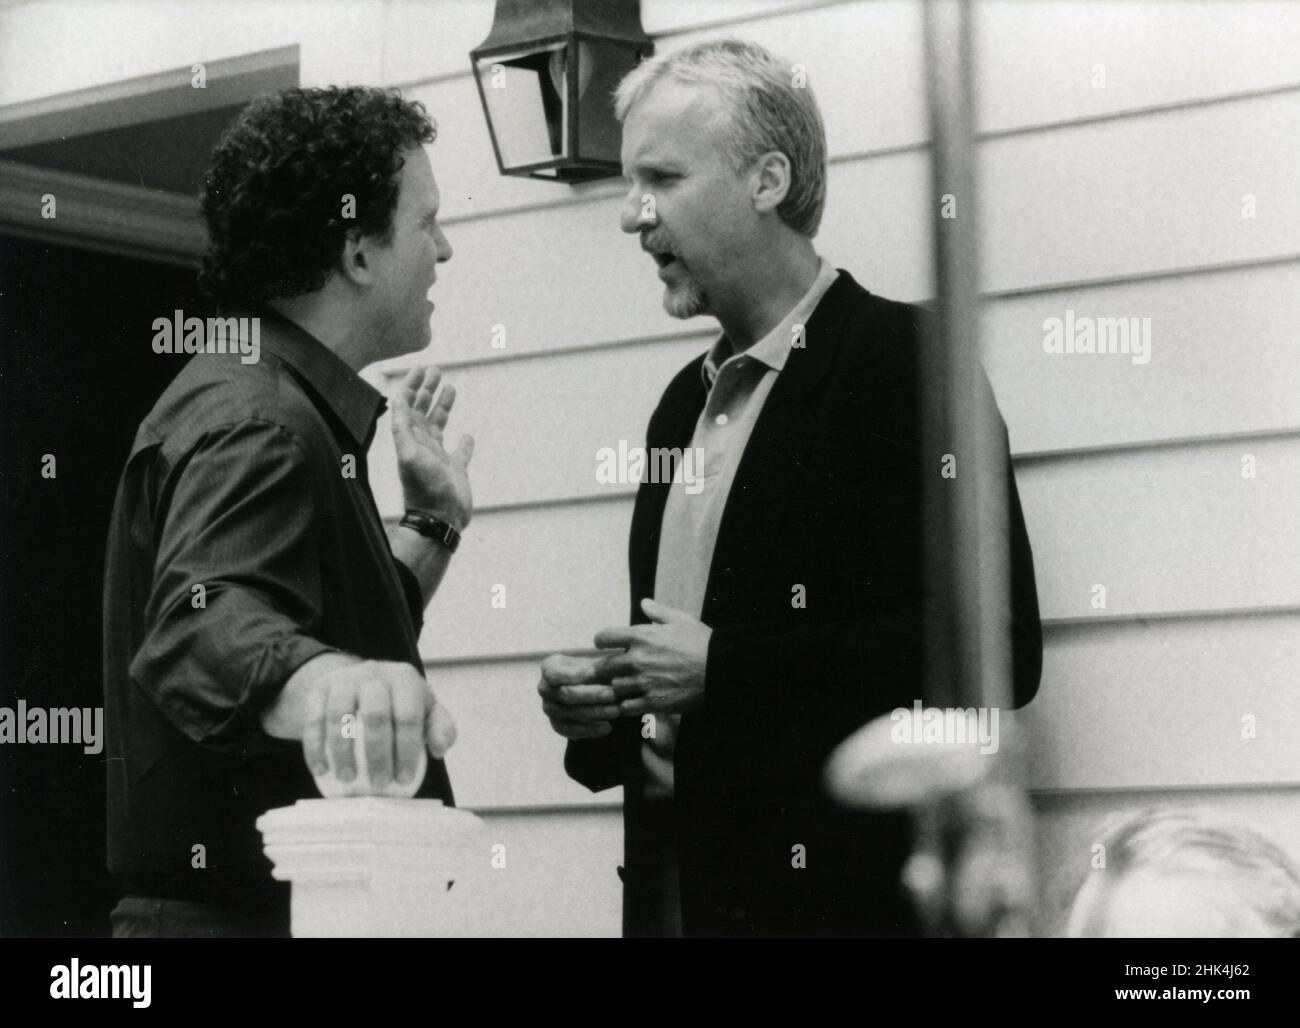 American actors James Cameron (right) and Albert Brooks in the movie The Muse, USA 1999 Stock Photo